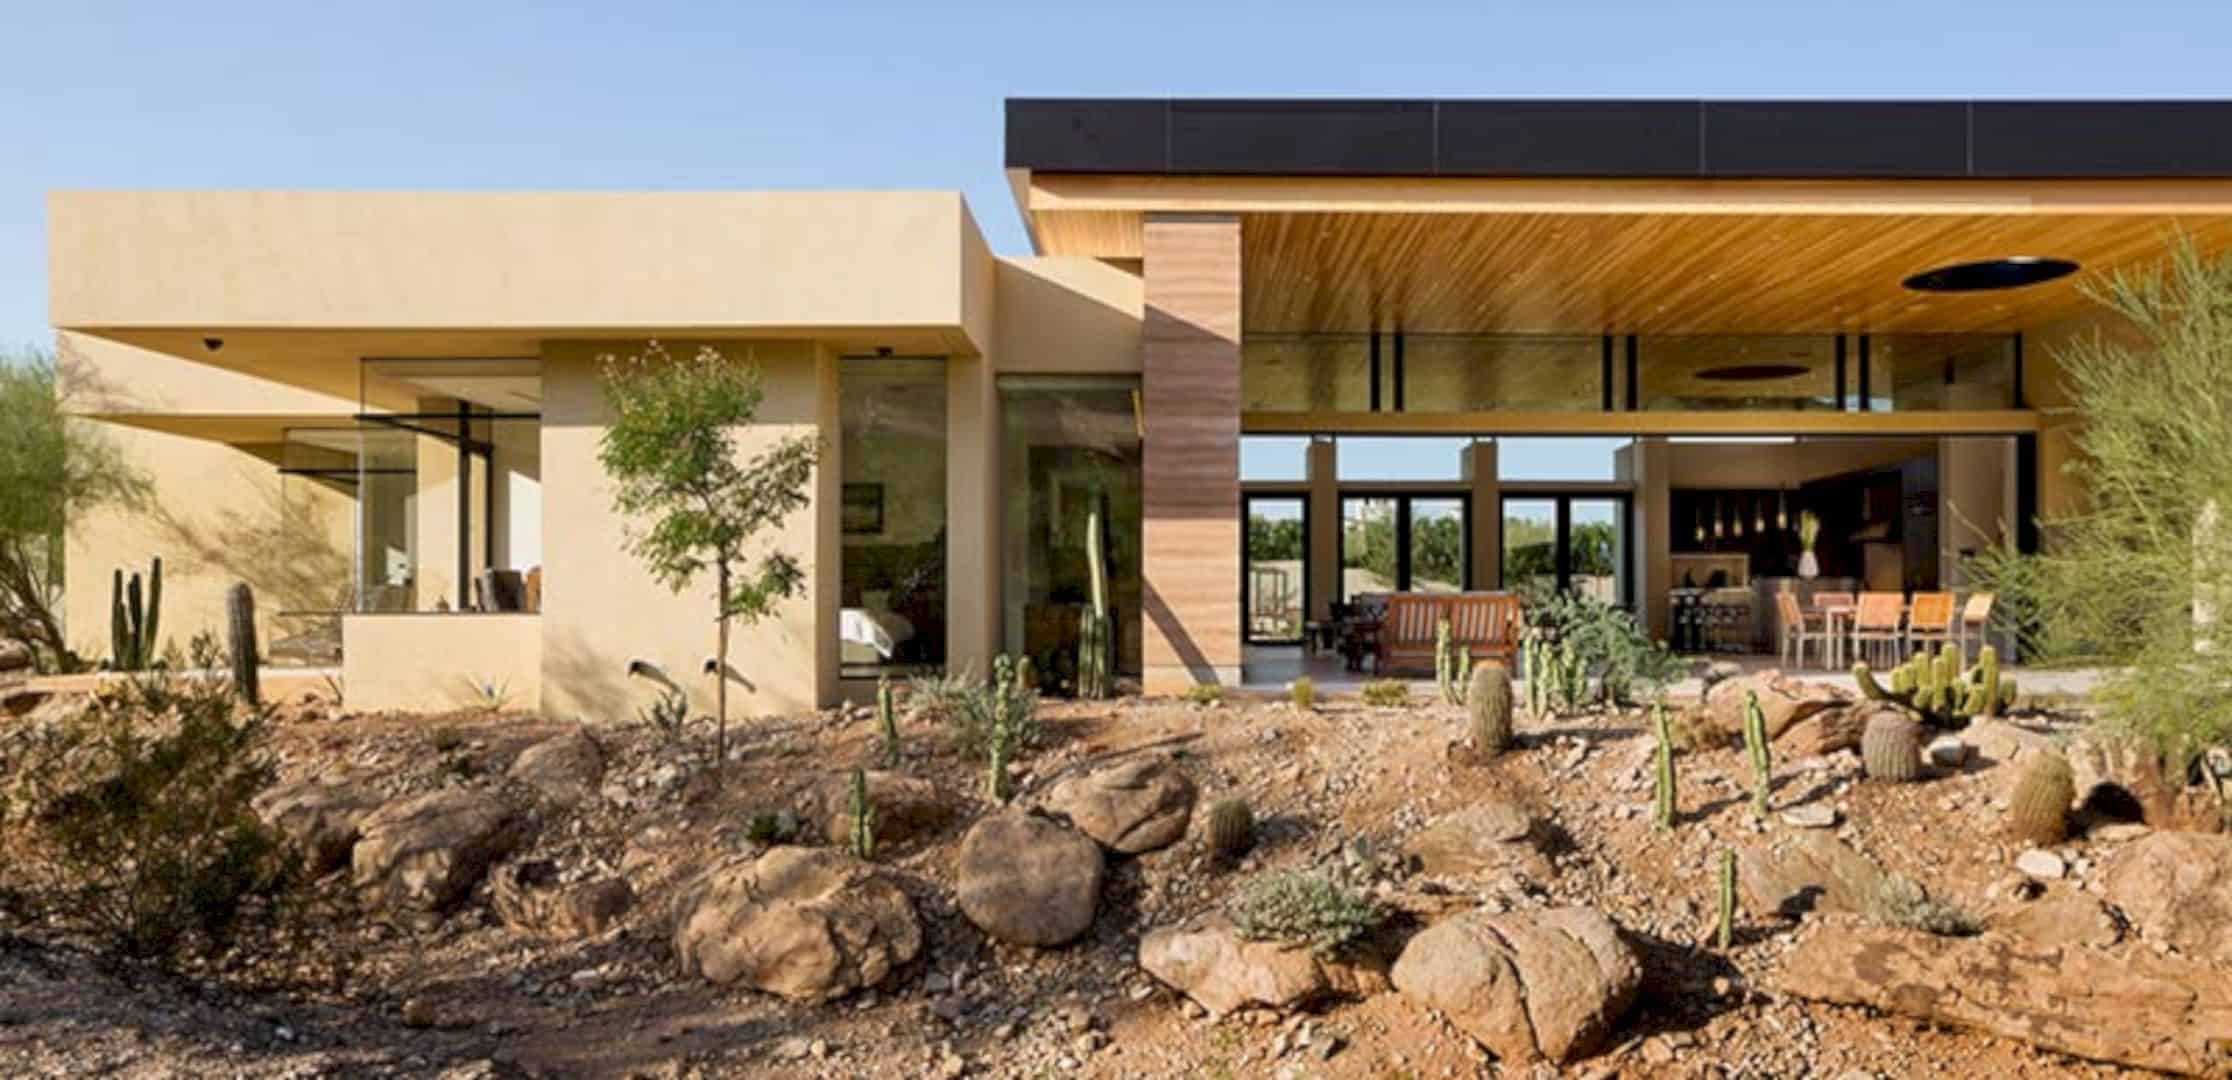 Desert Wash Residence A Modern Desert Home Defining Paradise Valleys Topographical Feature 13